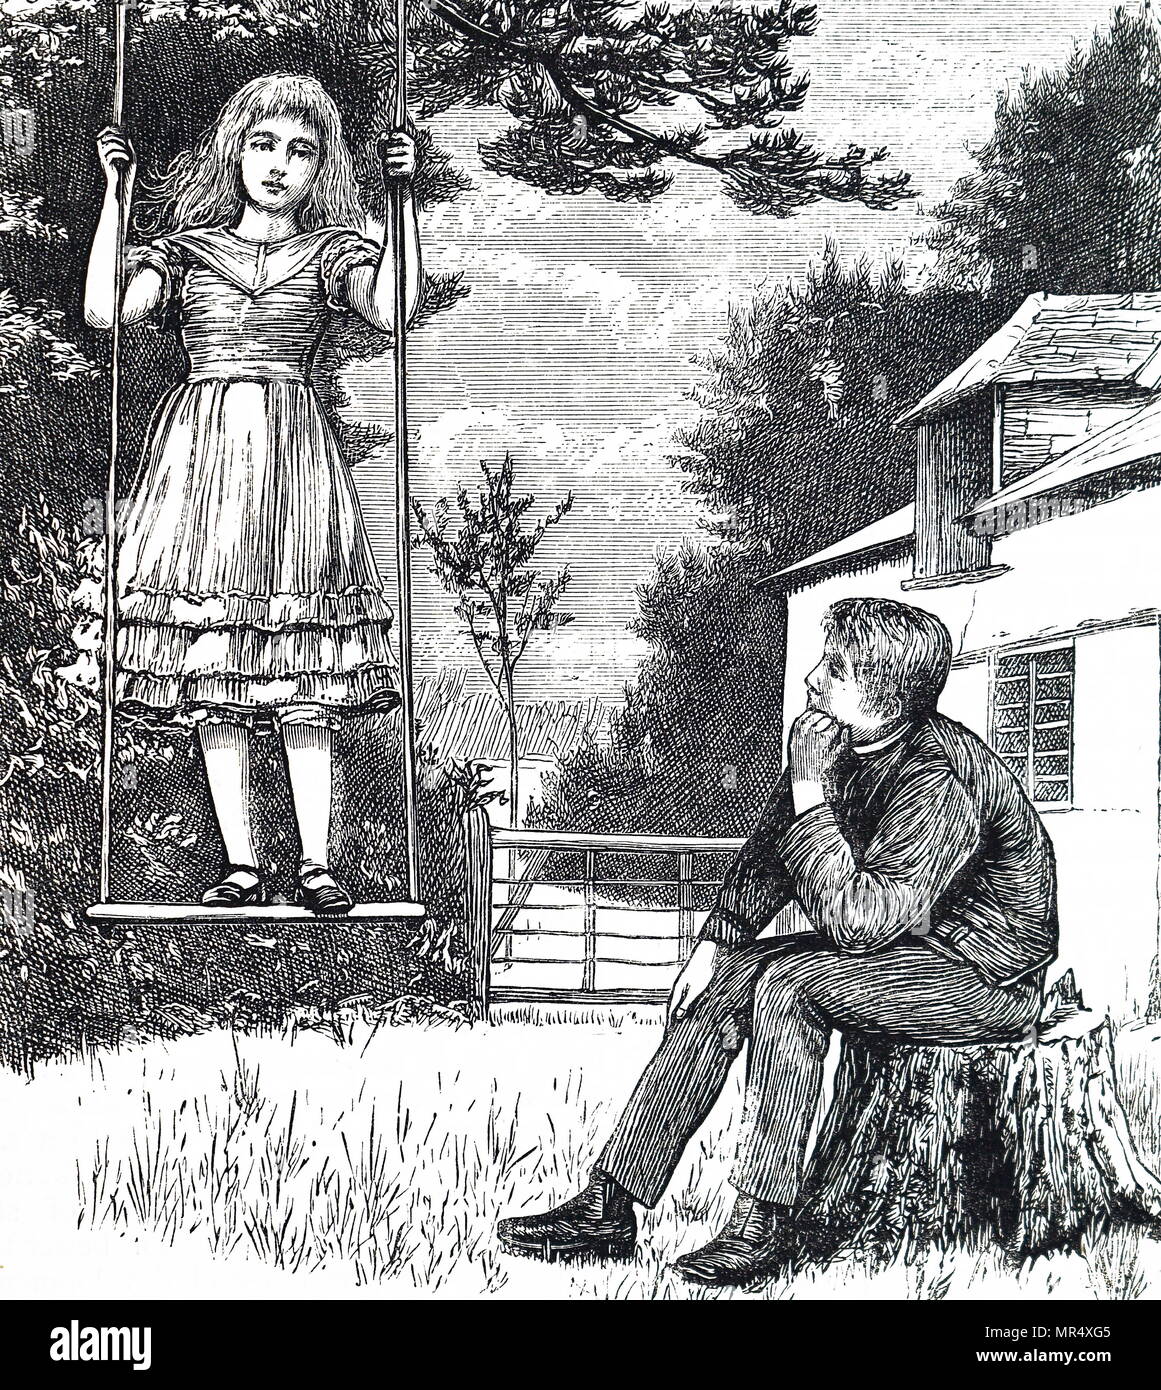 Illustration depicting a young girl playing on a swing as her father watches. Dated 19th century Stock Photo